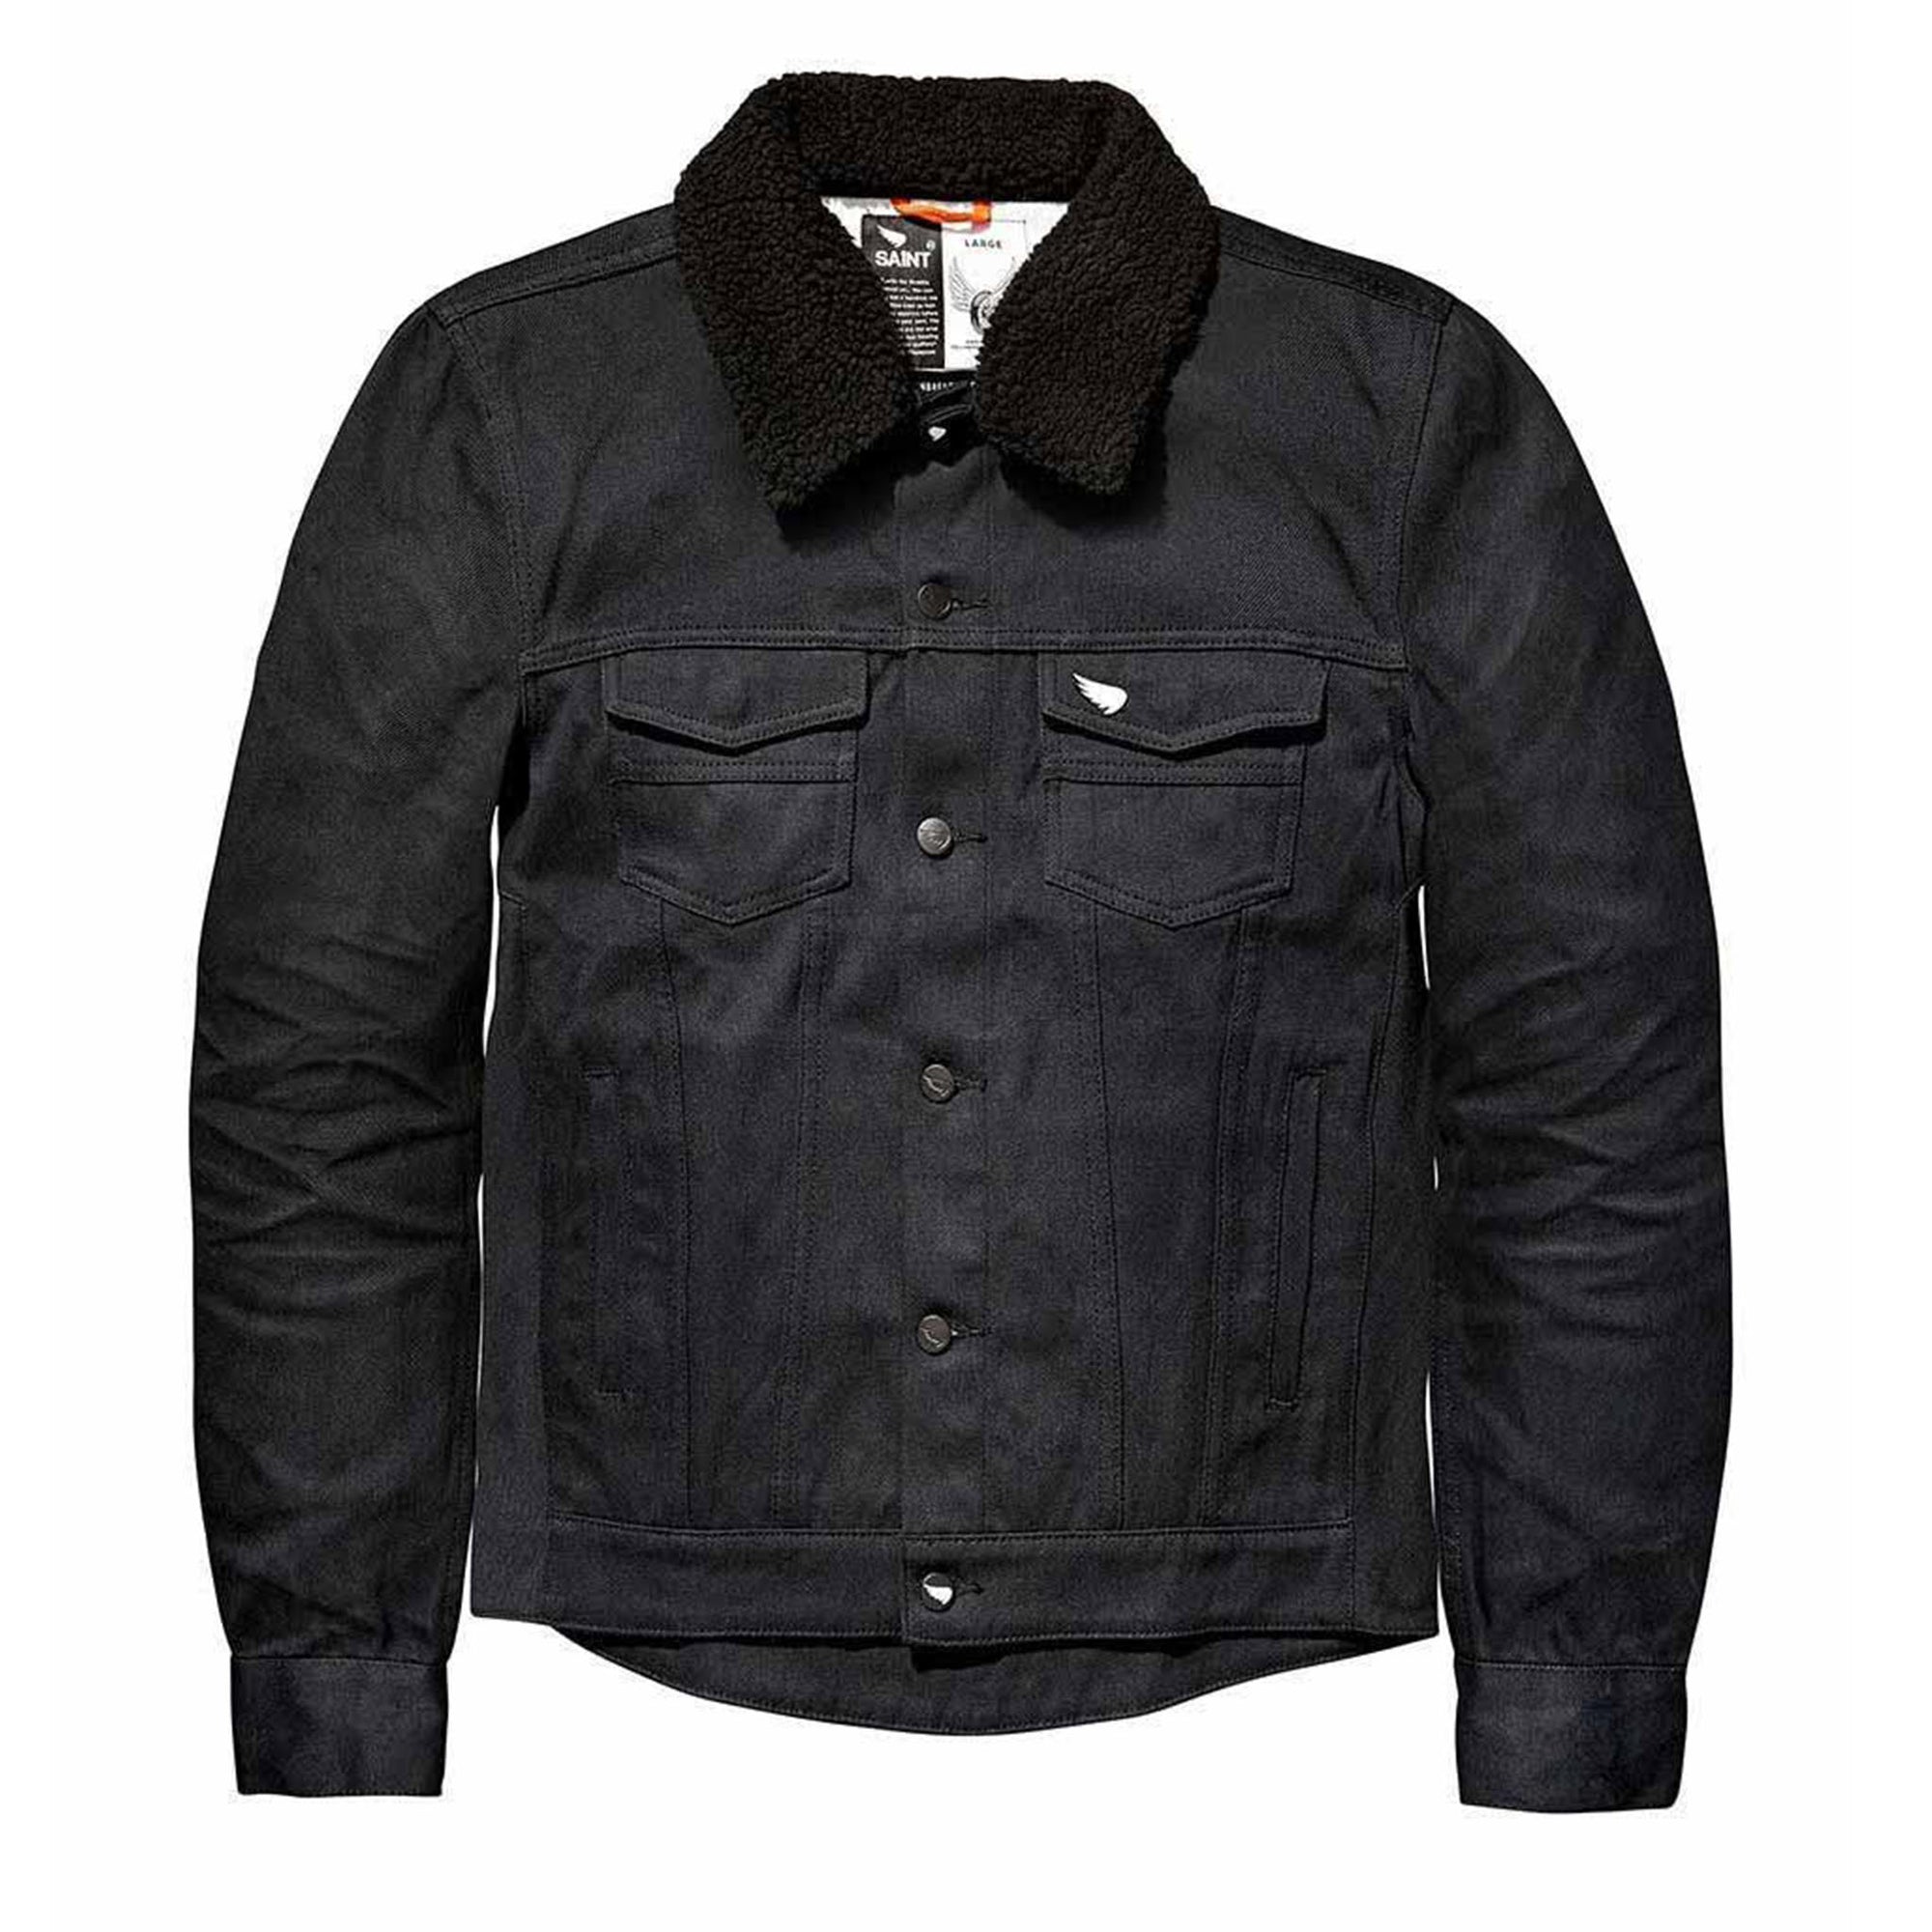 SAINT UNBREAKABLE JACKET WITH DETACHABLE BLACK SHEARLING COLLAR